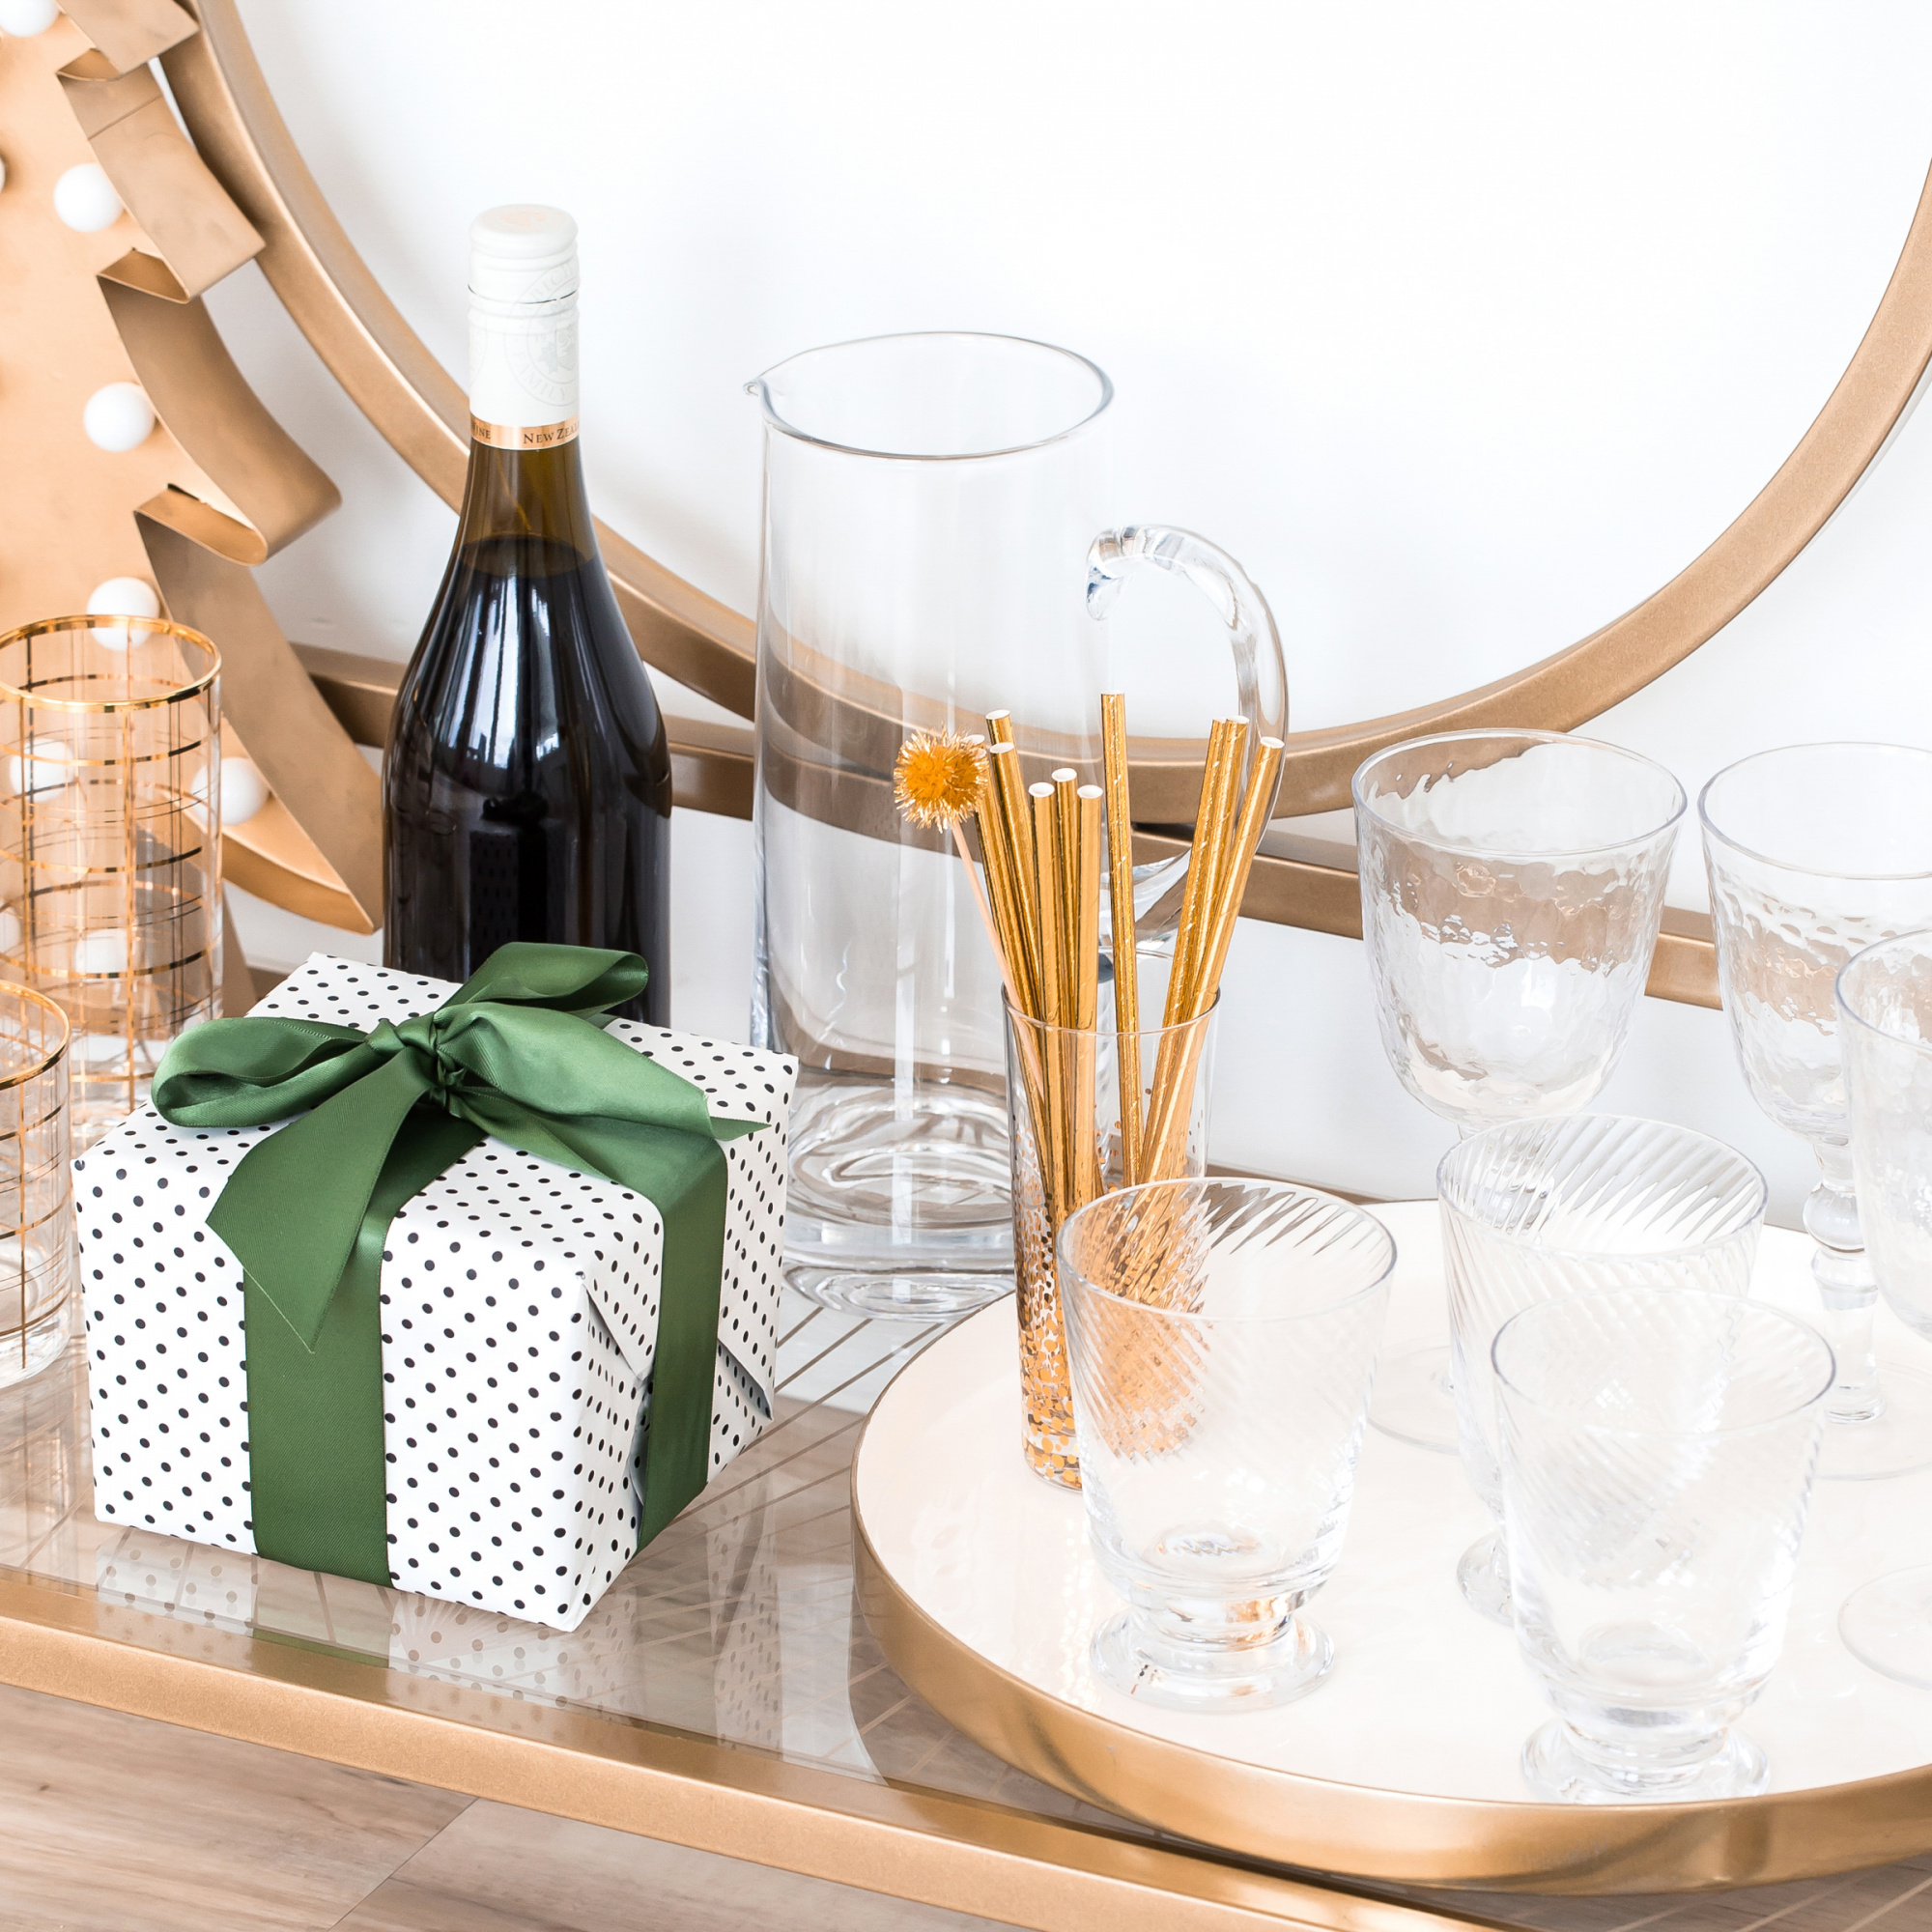 holiday entertaining, drink station, host a festive holiday meal